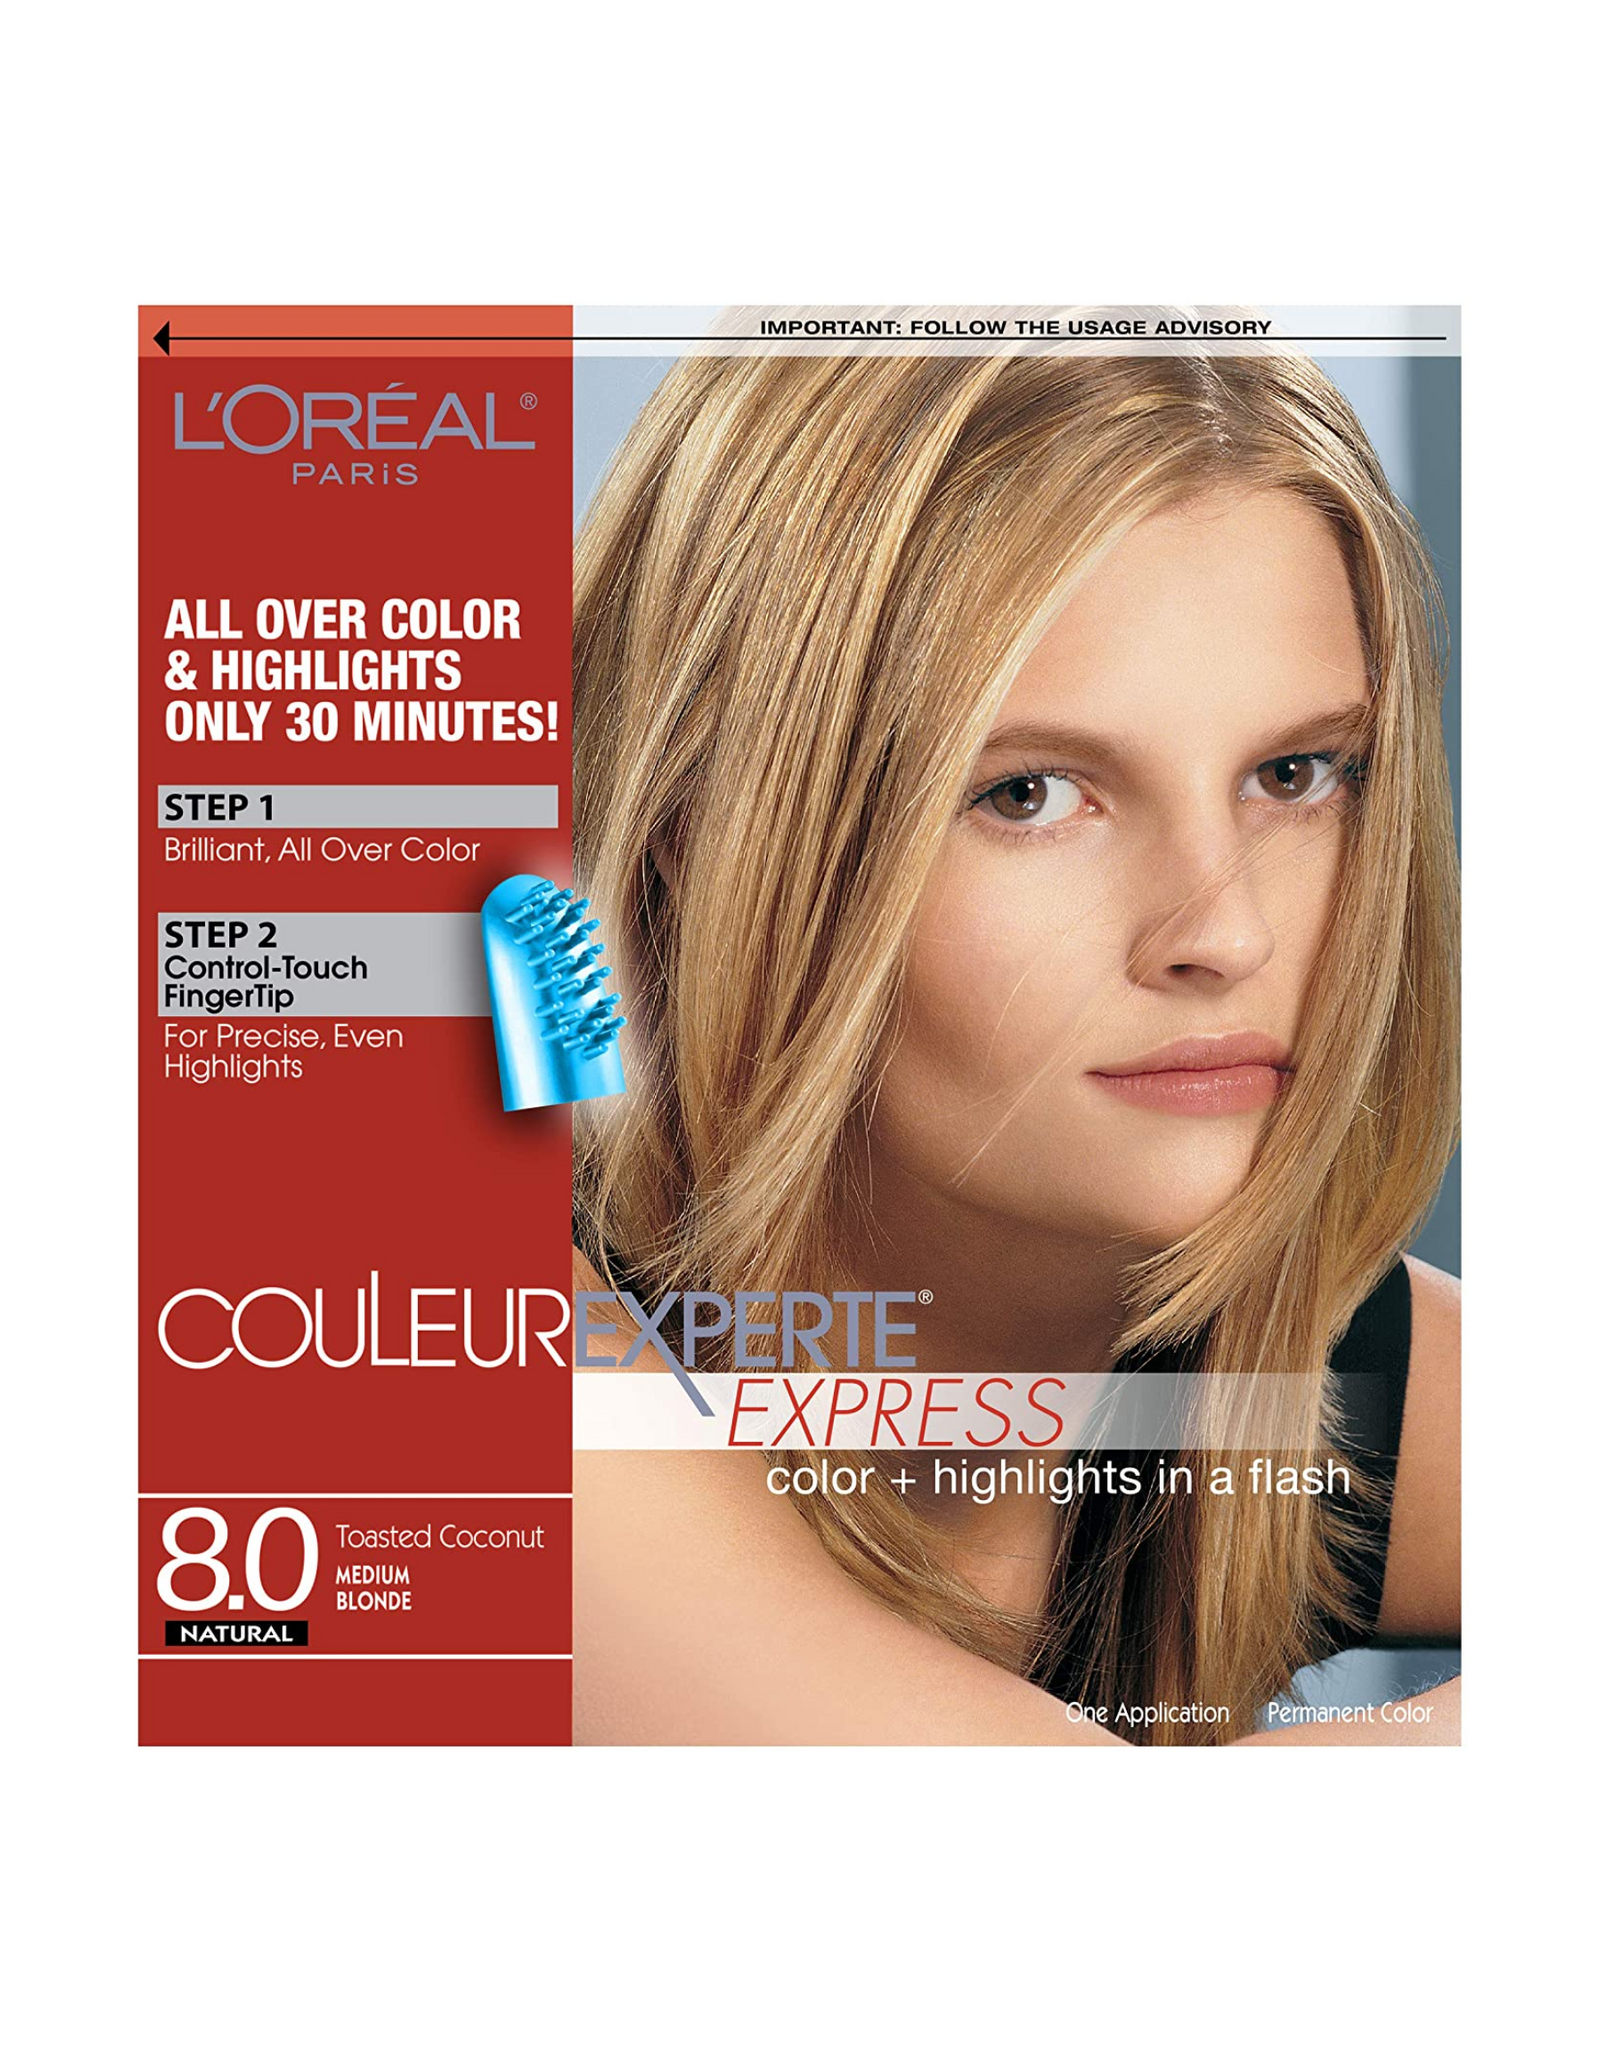 L'Oreal Paris Couleur Experte Express - Home Hair Color and Highlights Kit, Toasted Coconut